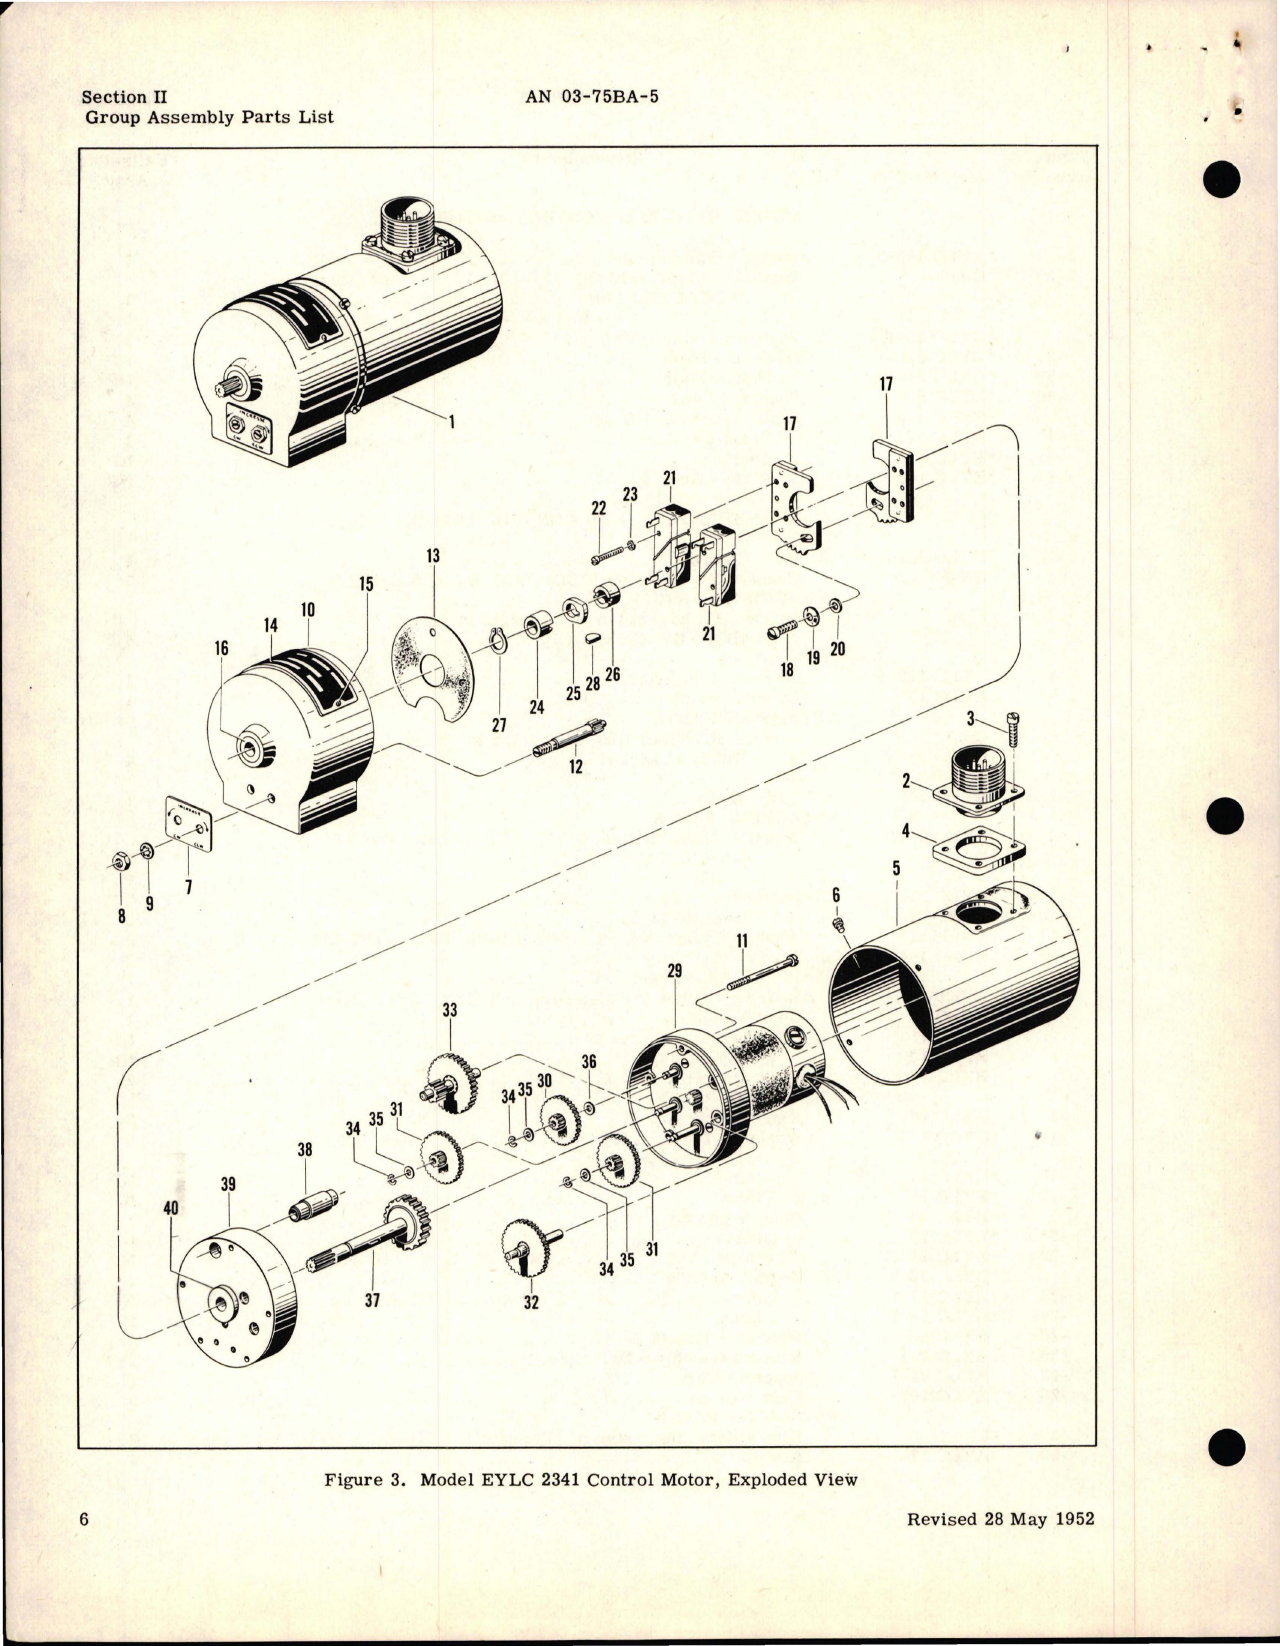 Sample page 6 from AirCorps Library document: Parts Catalog for Control Motors - Part EYLC Series 